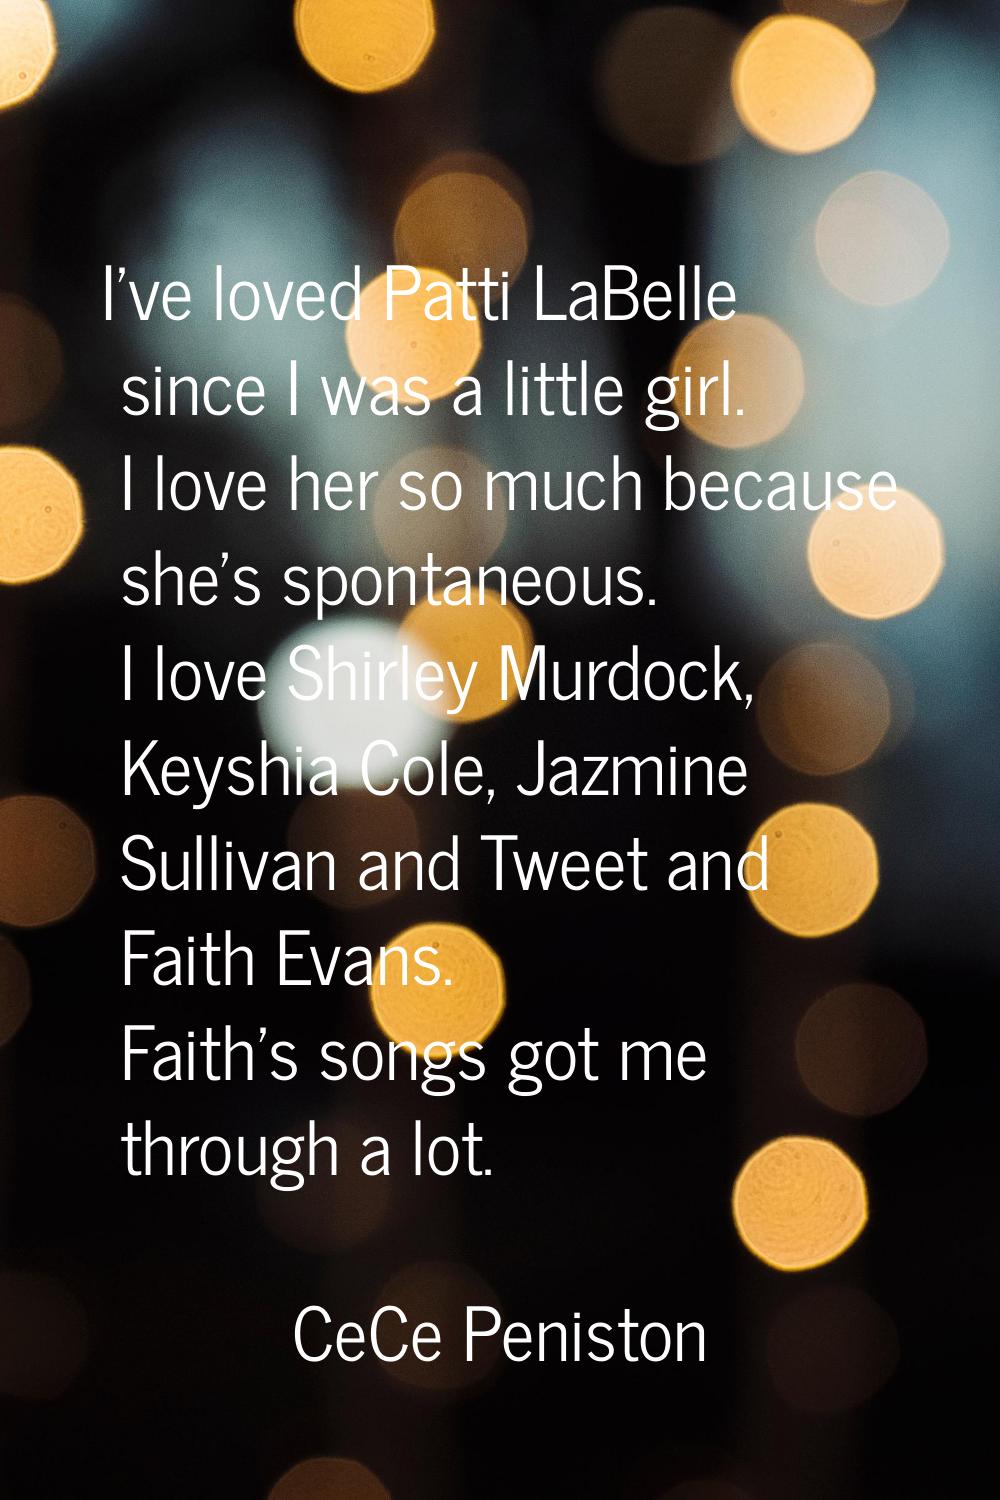 I've loved Patti LaBelle since I was a little girl. I love her so much because she's spontaneous. I